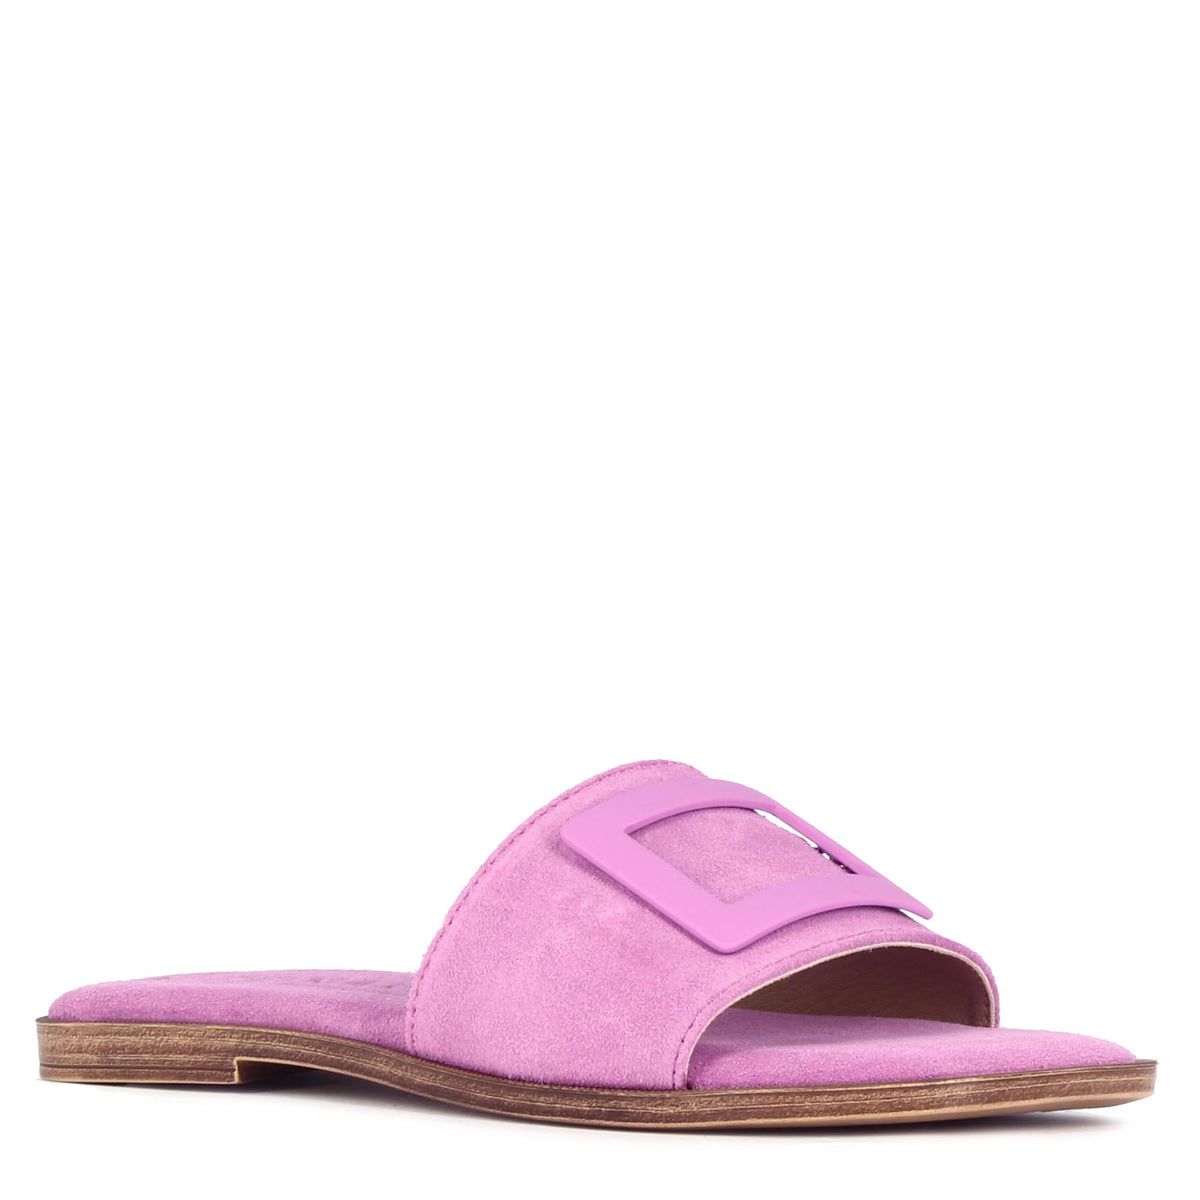 Women's suede slippers with purple band